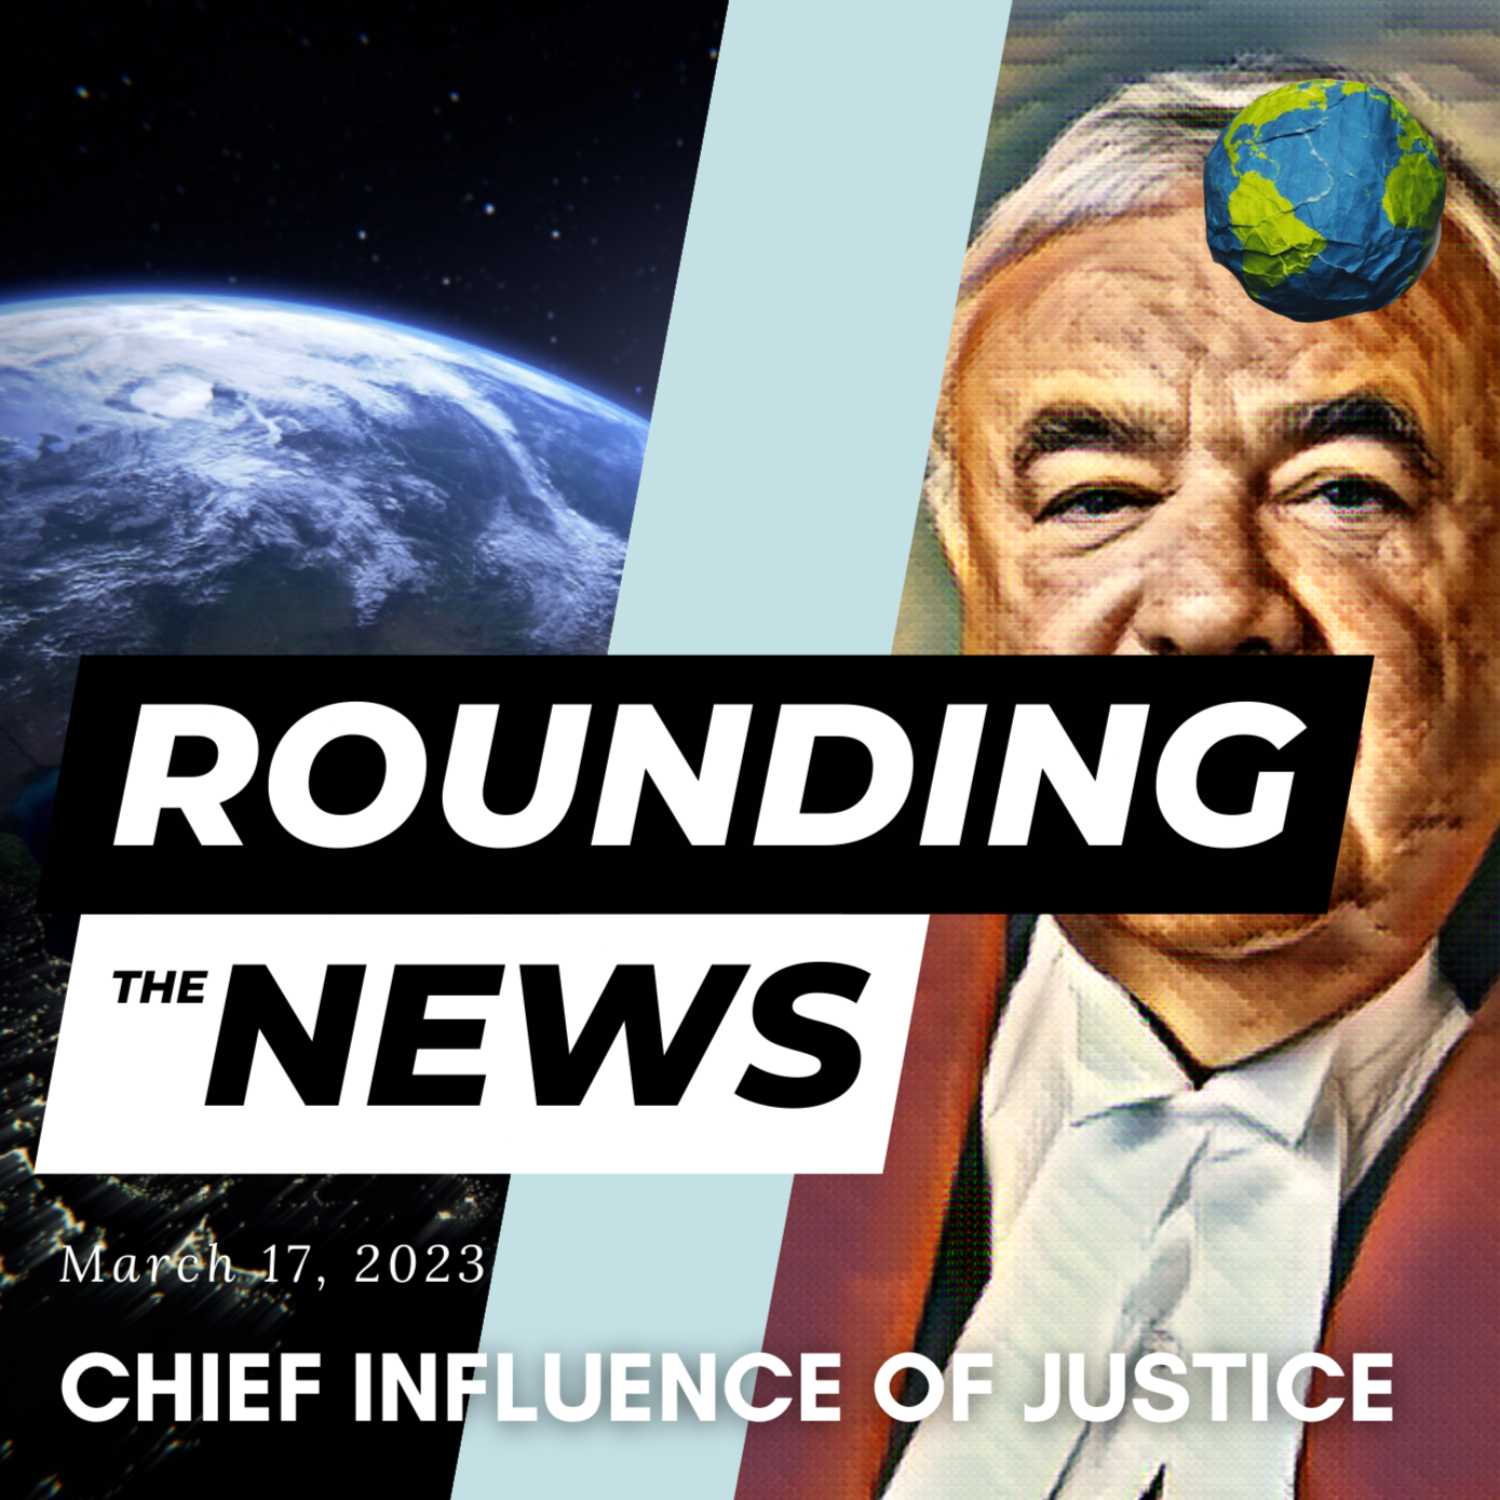 Chief Influence of Justice - Rounding the News